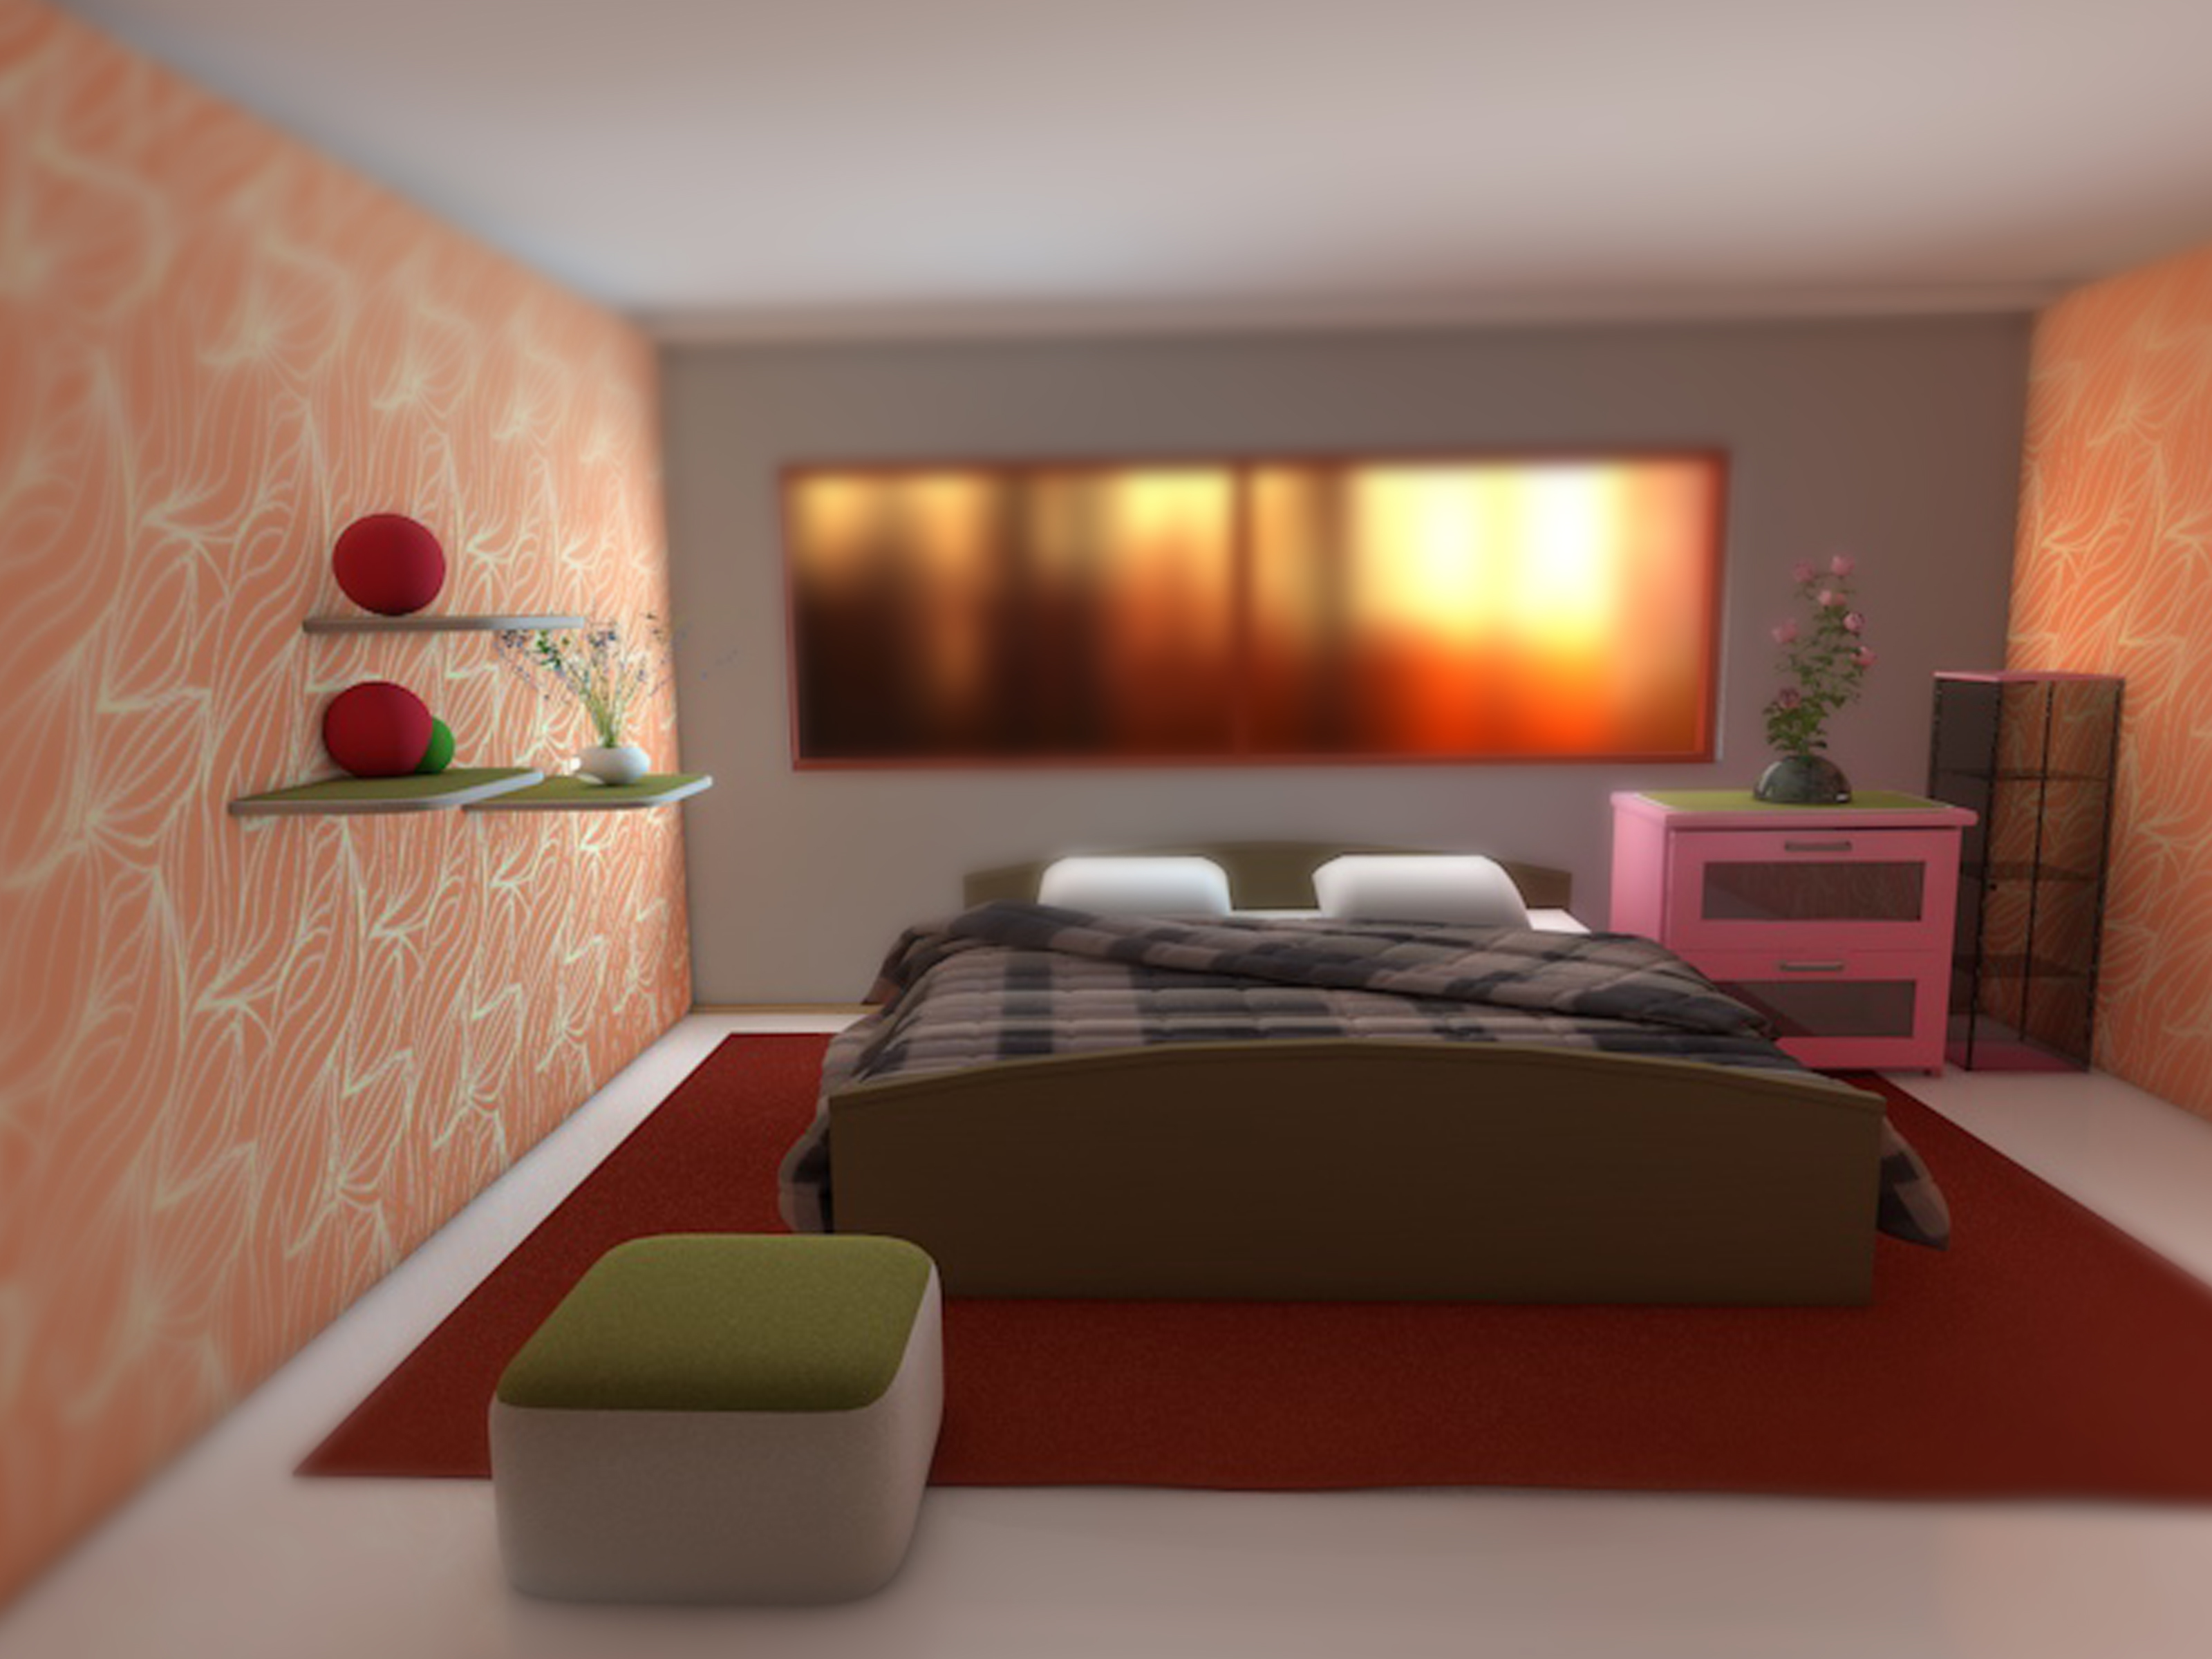 Image Titled Make Your Bedroom Look Girly Step - Bedroom - HD Wallpaper 